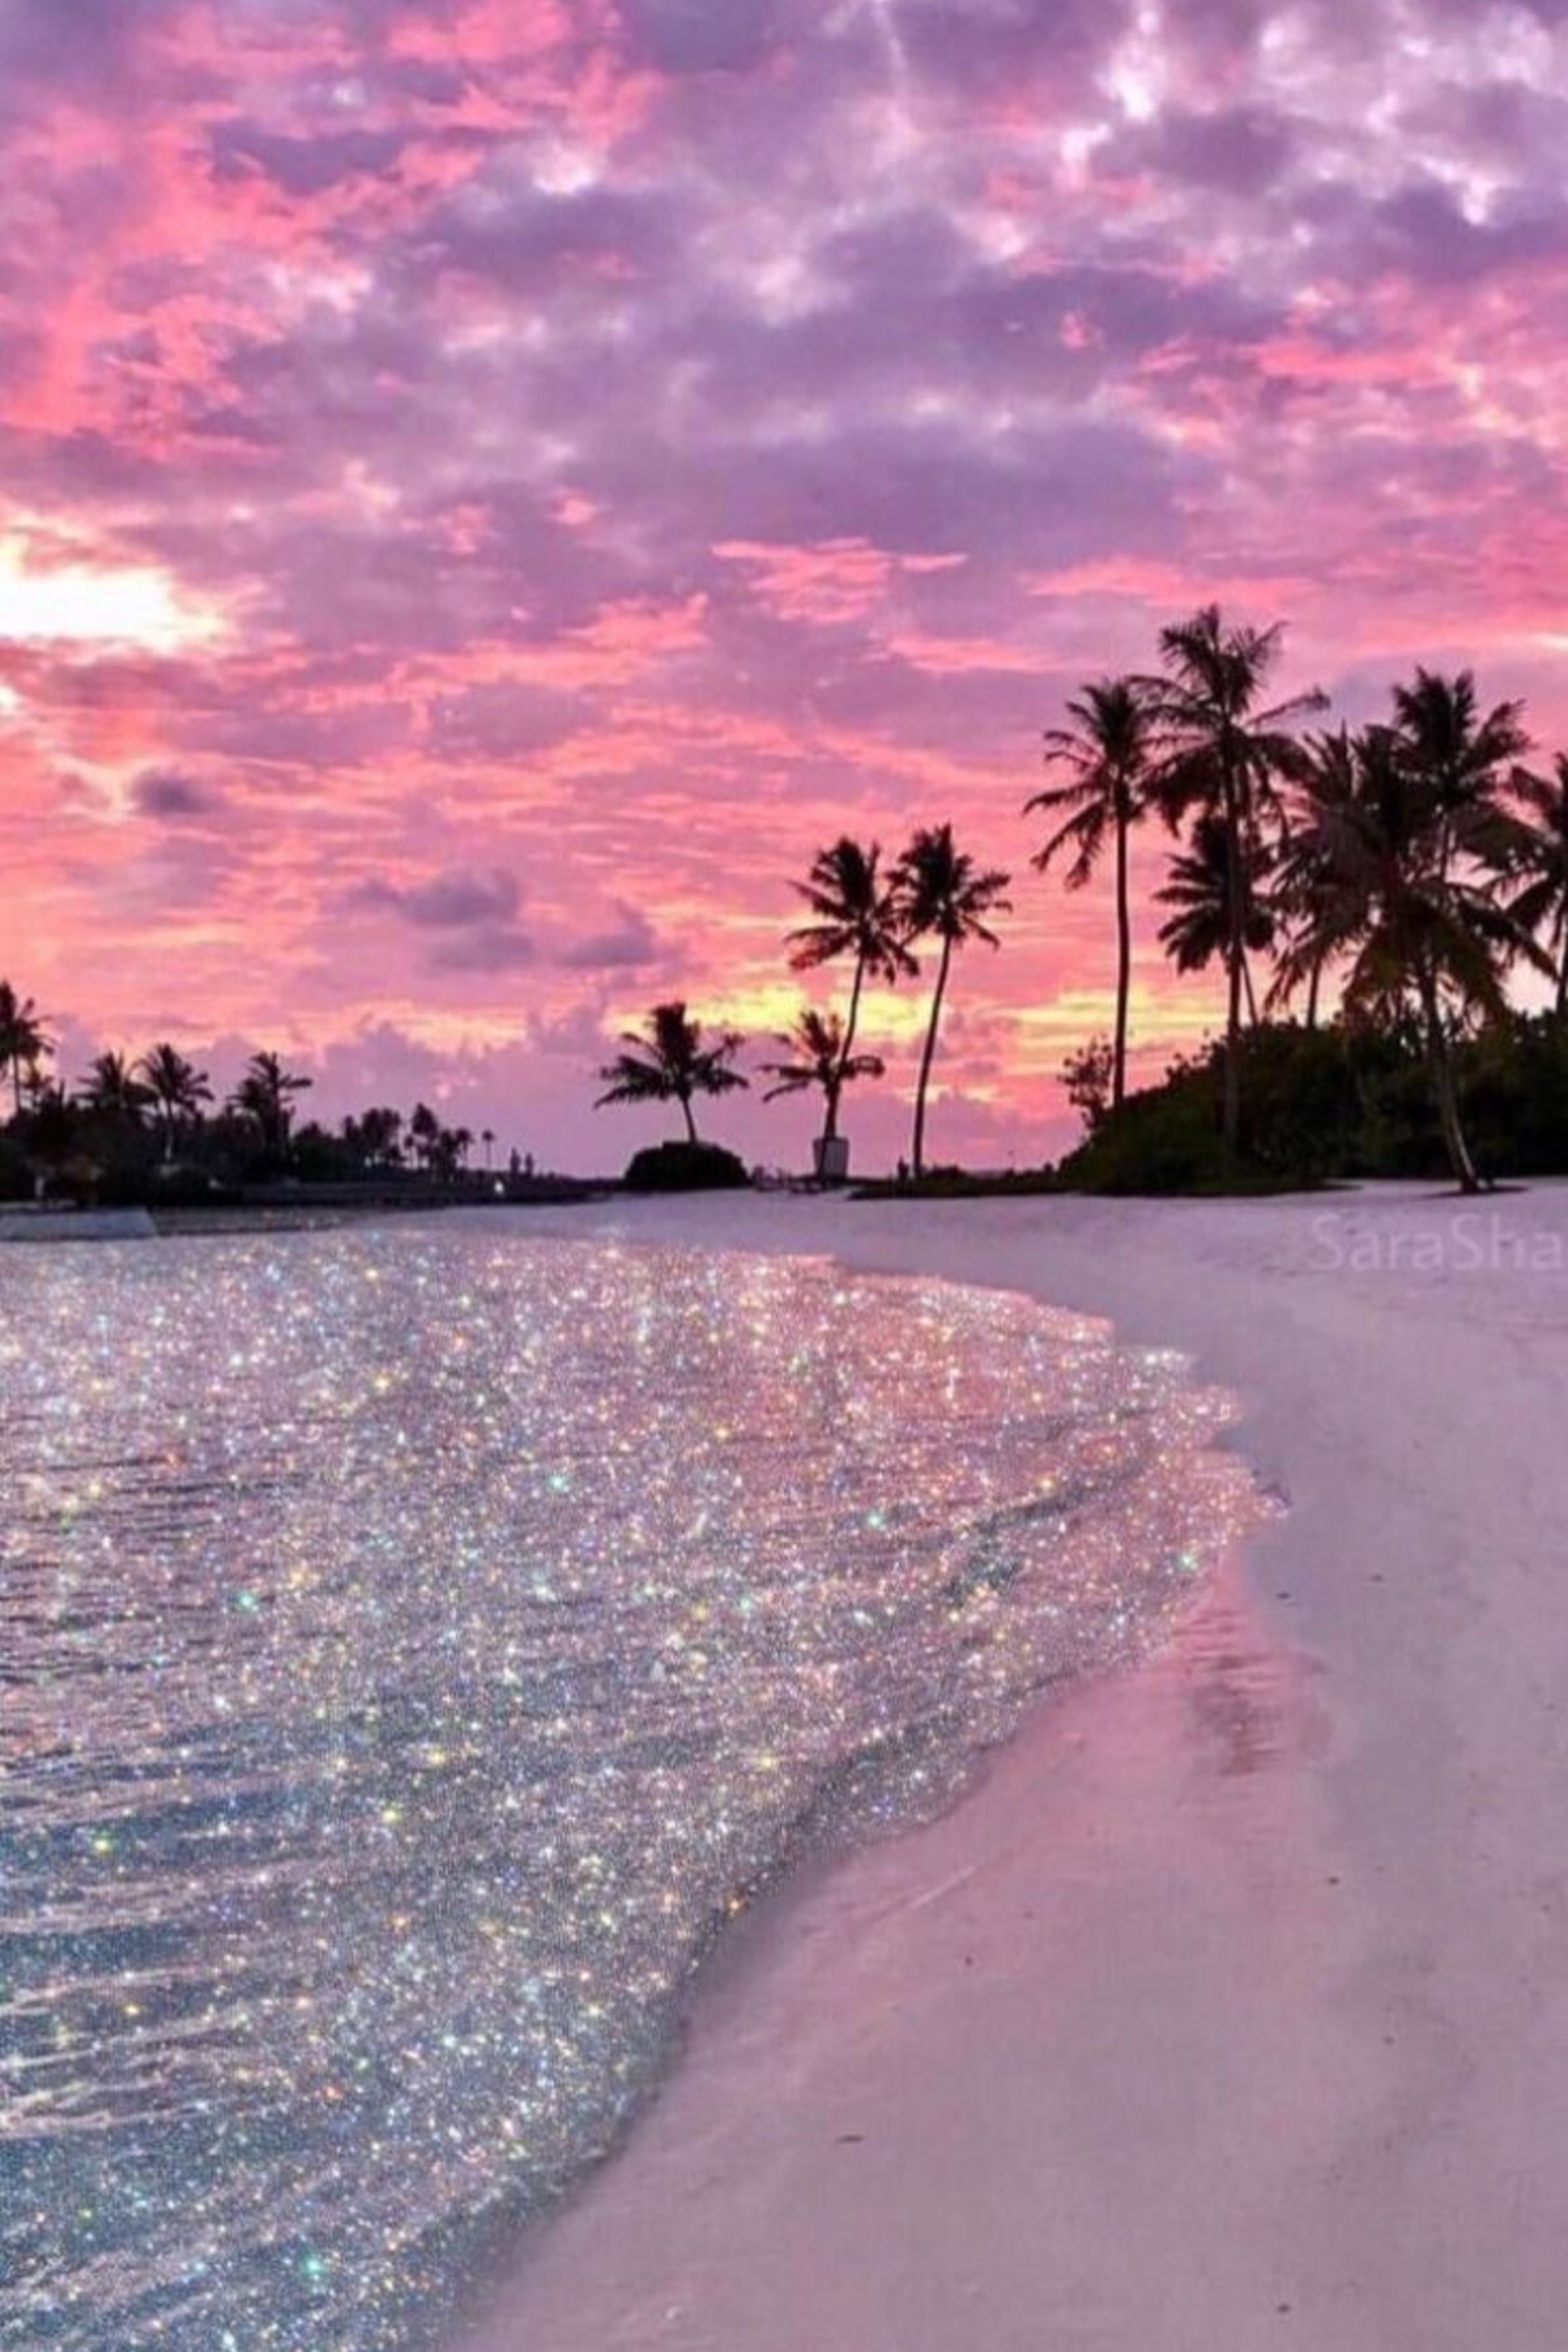 A beach with palm trees and a pink and purple sunset. - Bling